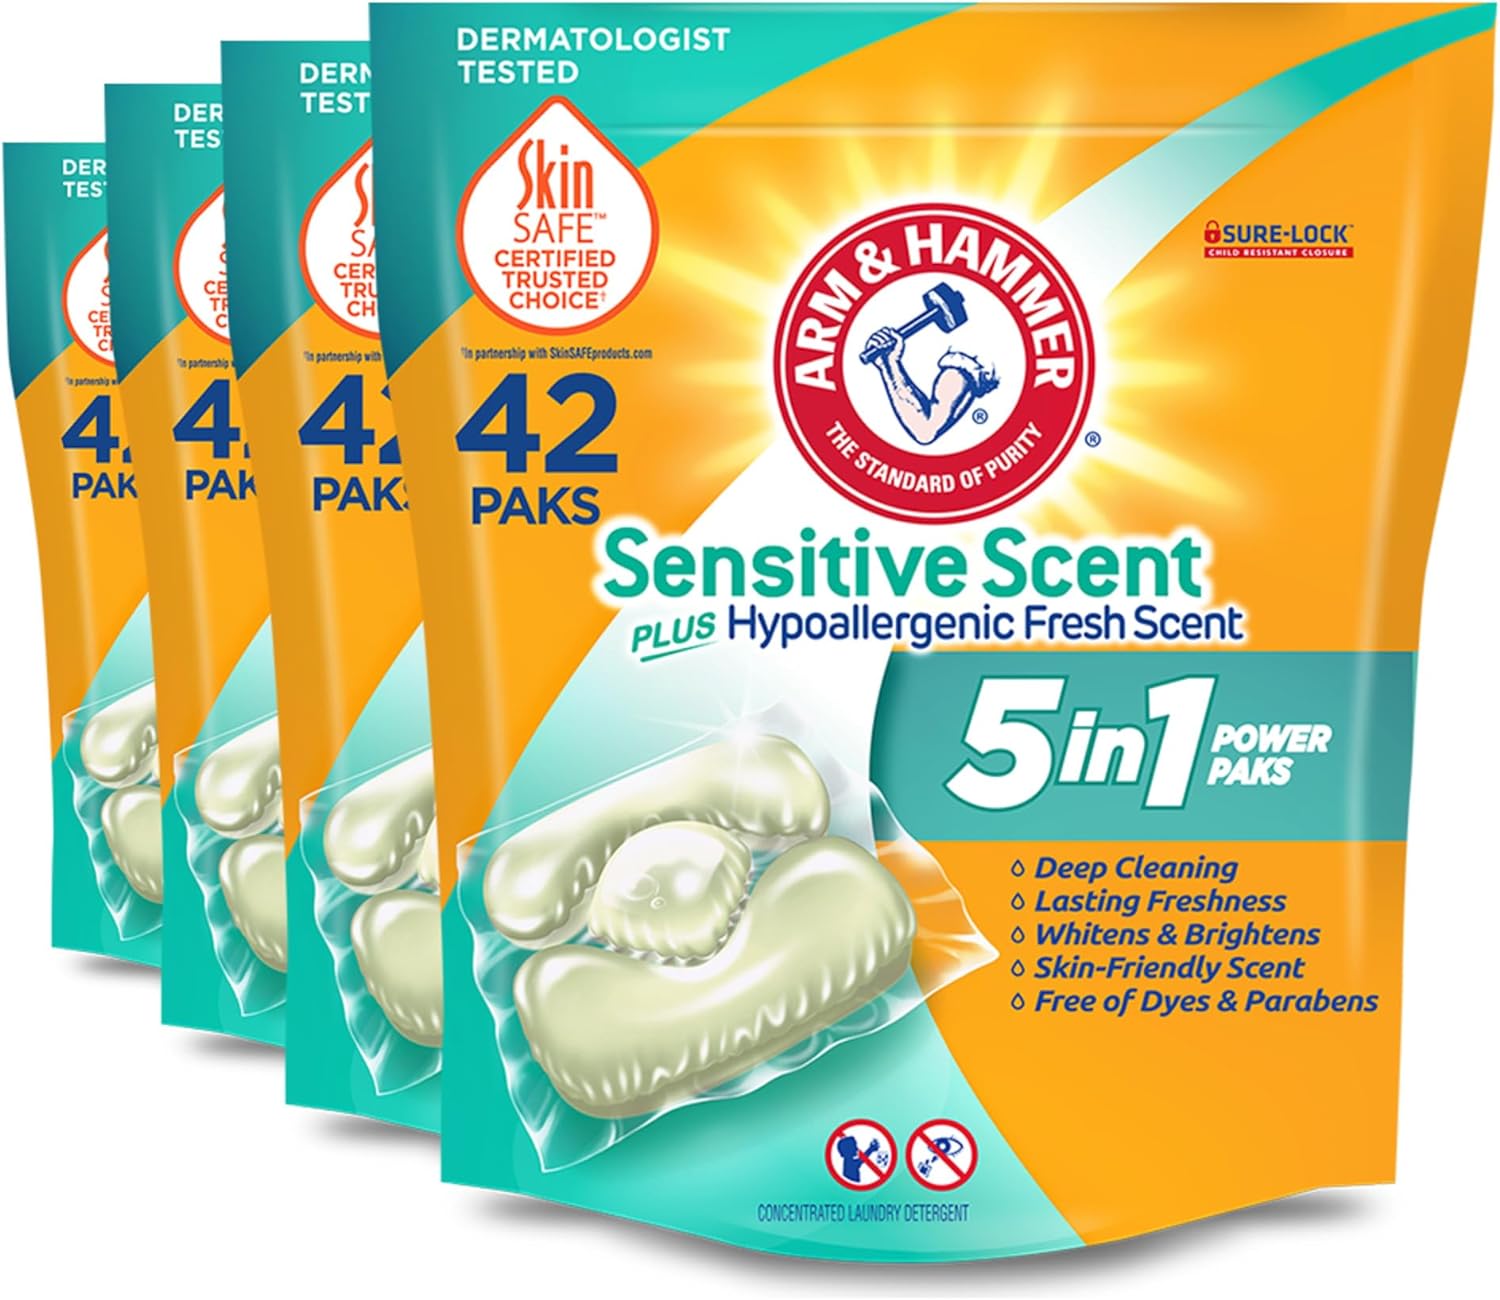 4-Pack 42-Count Arm & Hammer HE 5-in-1 Liquid Laundry Detergent Power Paks (Sensitive Scent) $17.48 w/ S&S + Free S&H w/ Prime or $35+